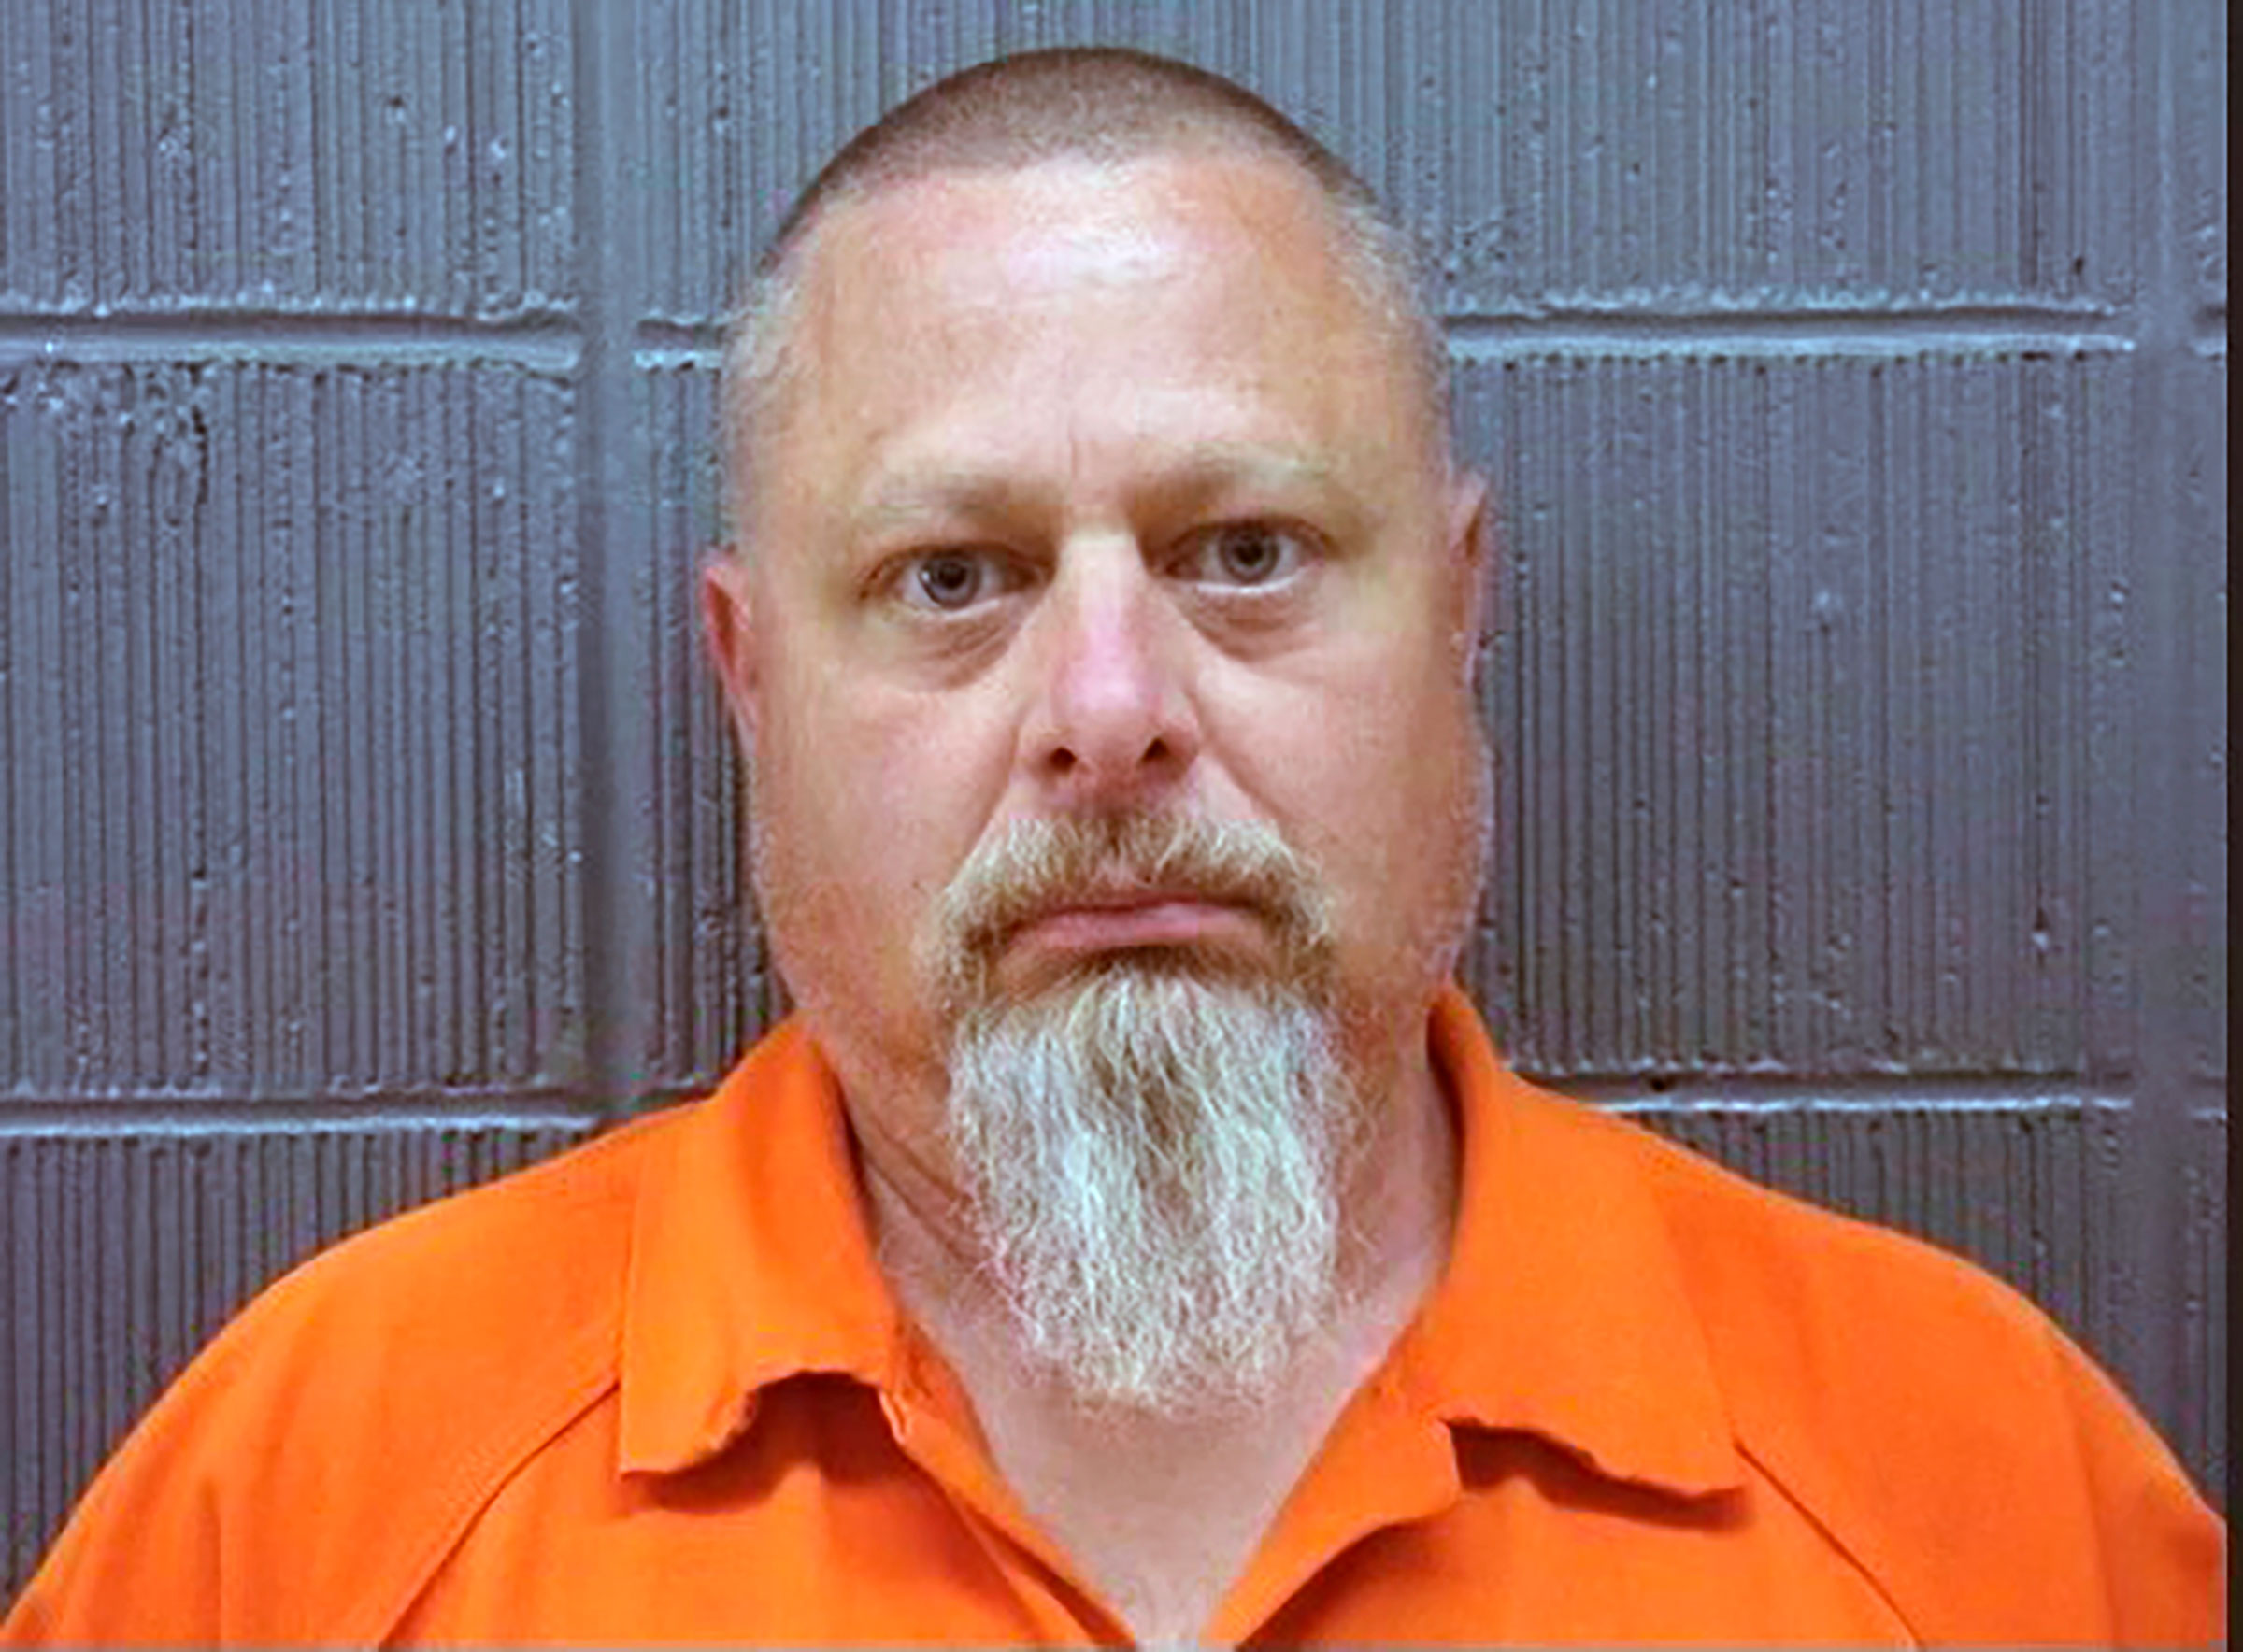 Richard Allen, 50, was arrested Friday on two murder counts in the killings of Liberty German, 14, and Abigail Williams, 13. (Indiana State Police/AP)